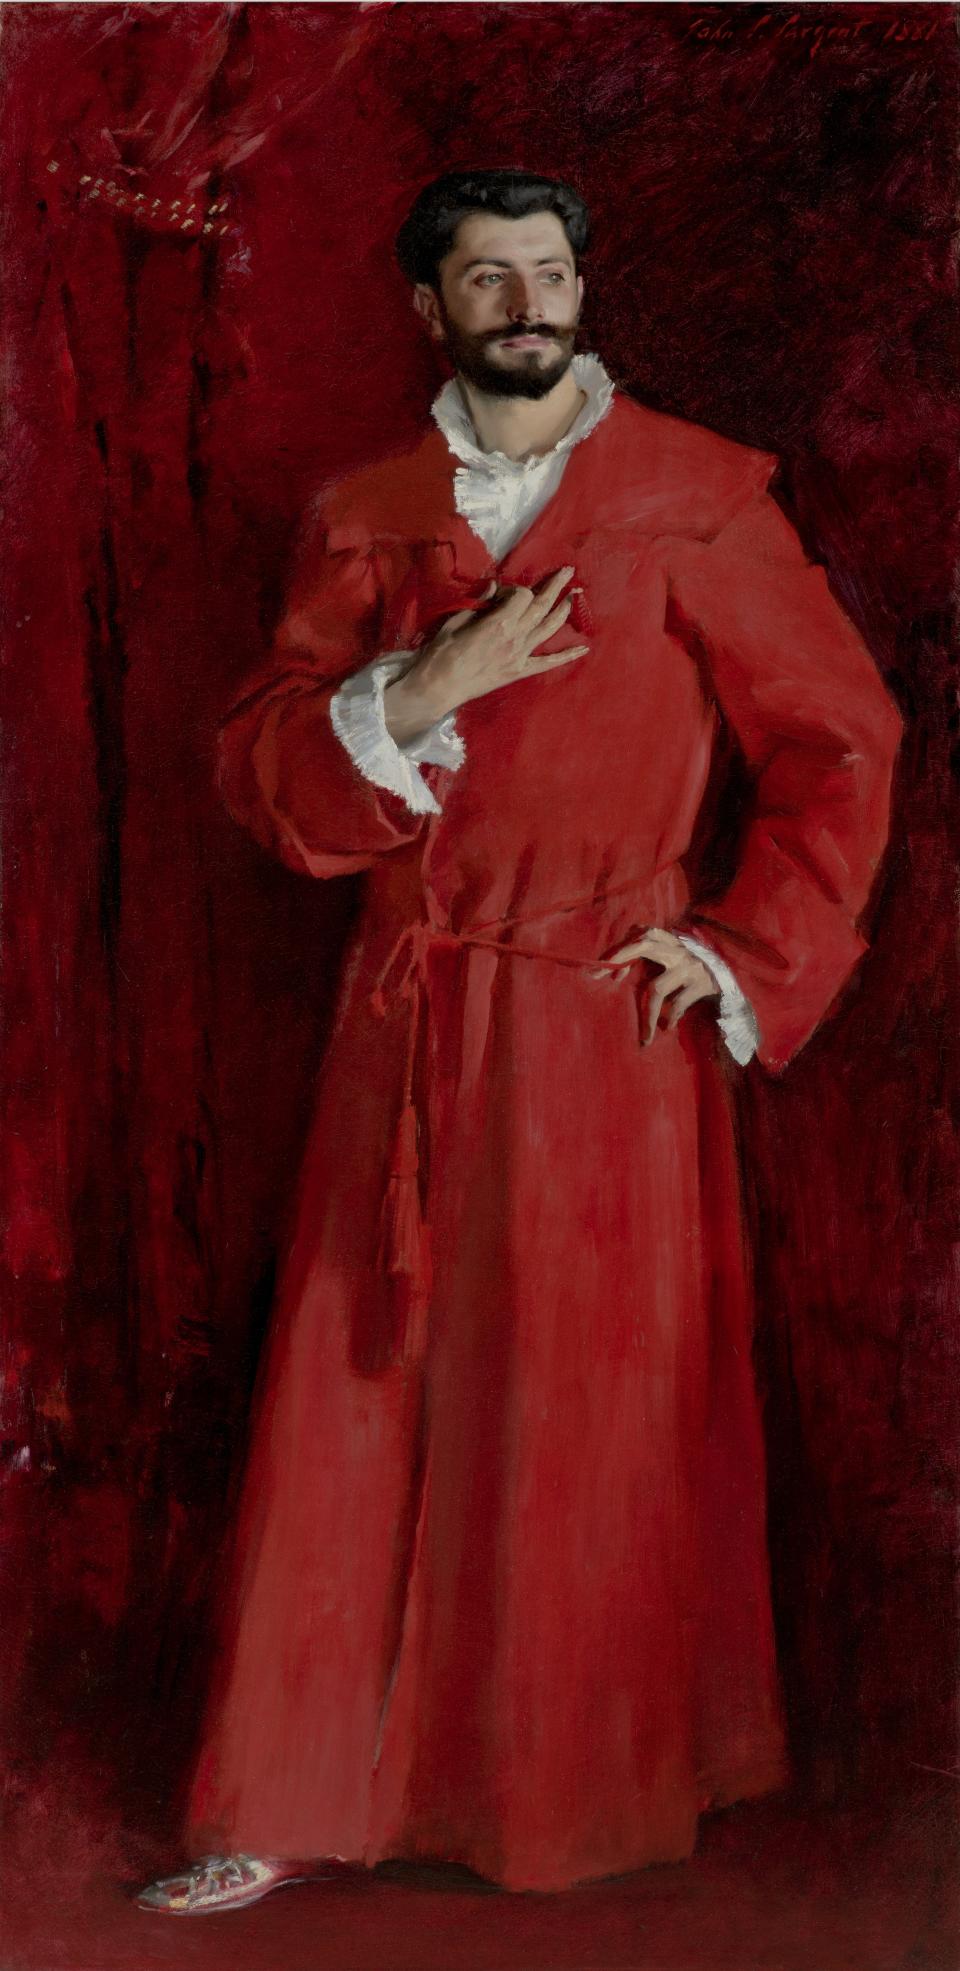 John Singer Sargent, “Dr. Pozzi at Home,” 1881. The Armand Hammer Collection.